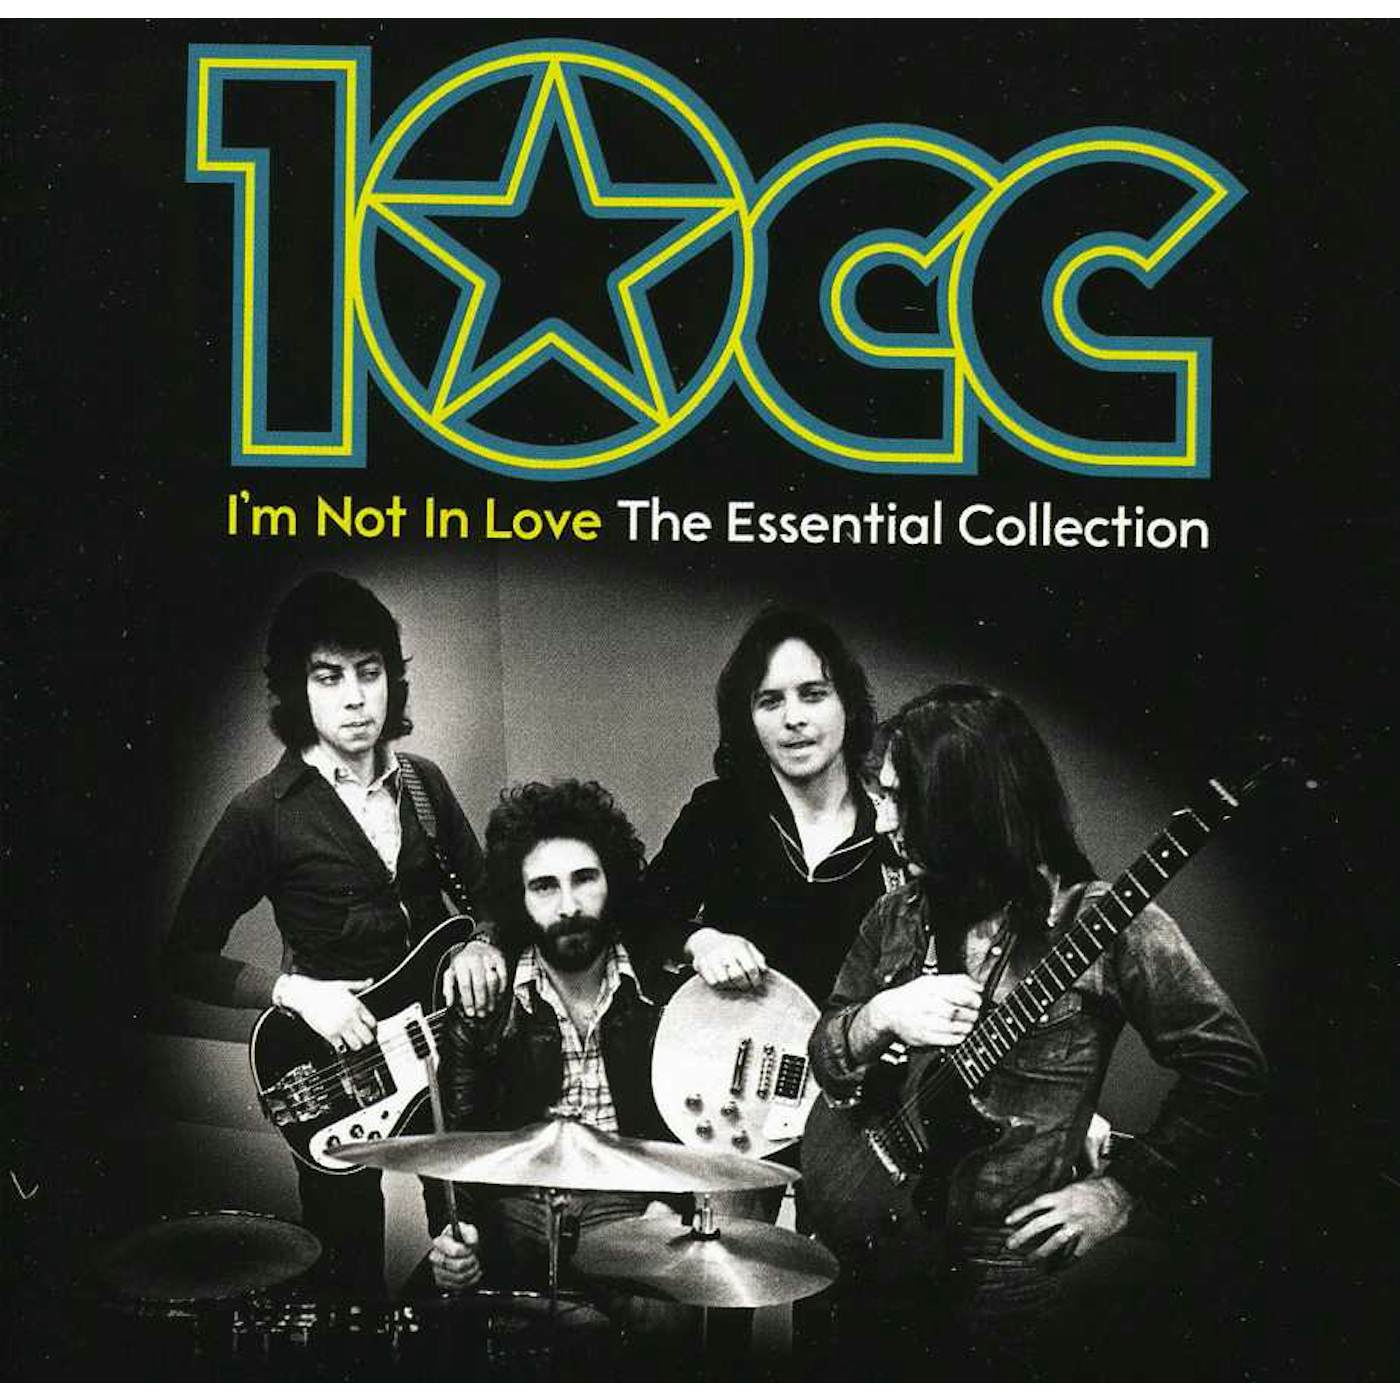 10cc I'M NOT IN LOVE: ESSENTIAL COLLECTION CD